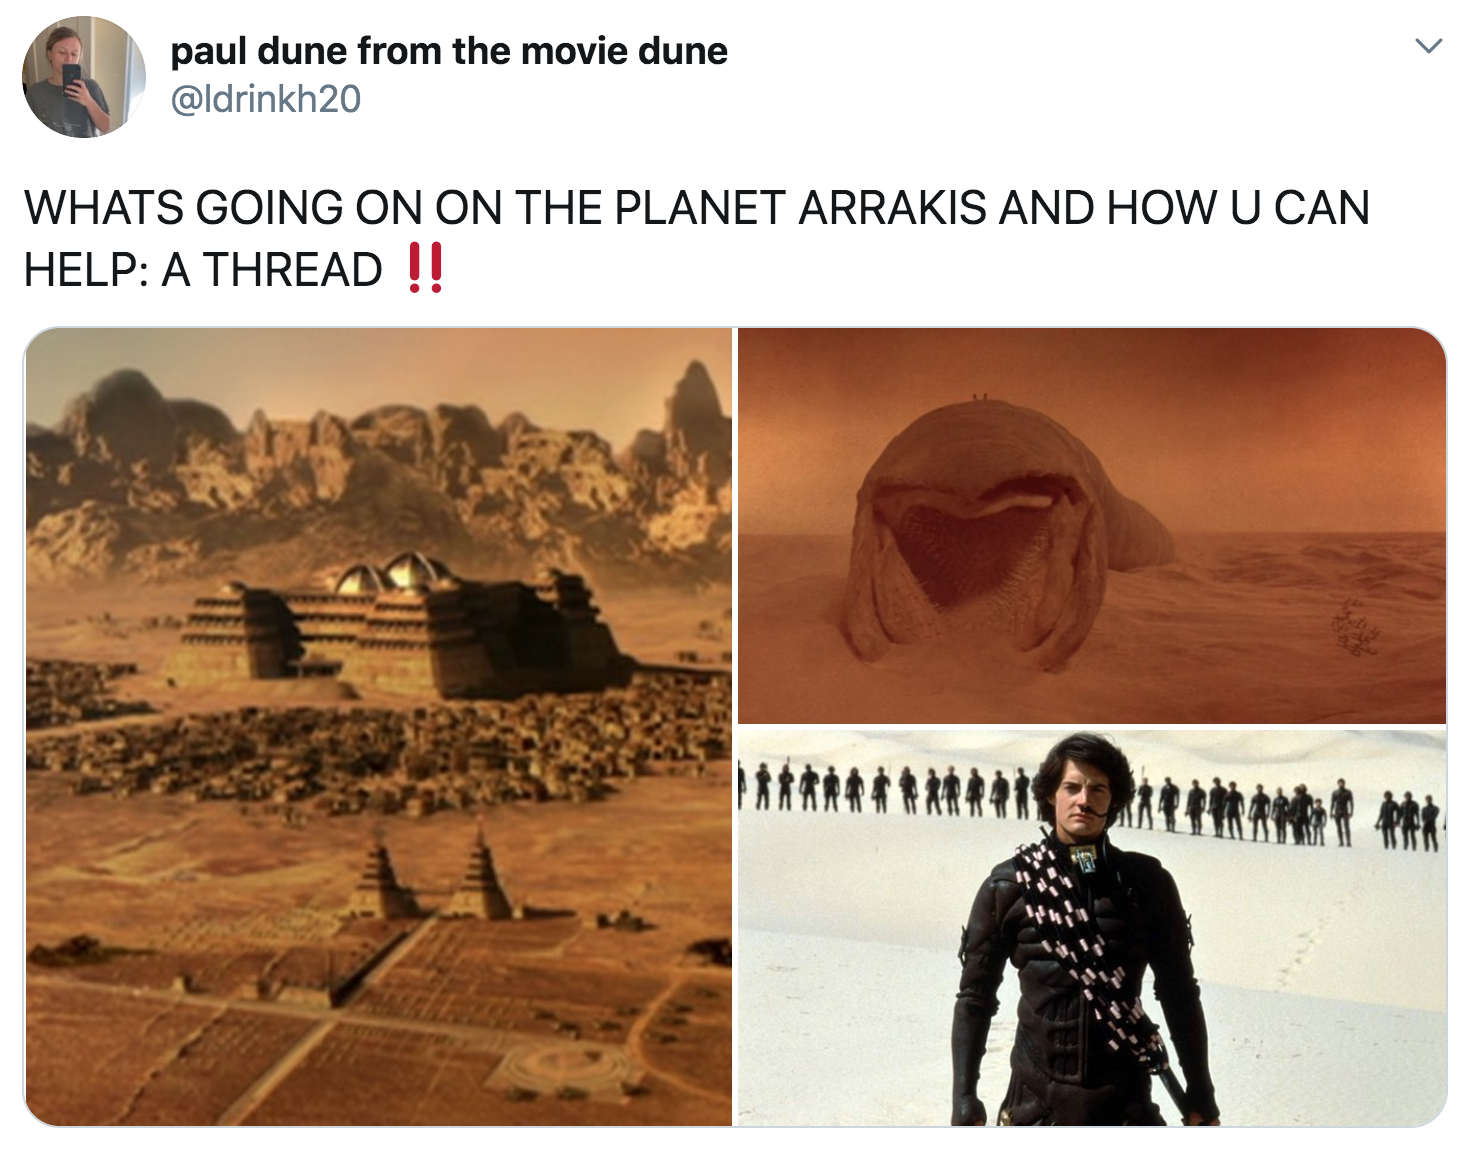 sand - paul dune from the movie dune Whats Going On On The Planet Arrakis And How U Can Help A Thread !!